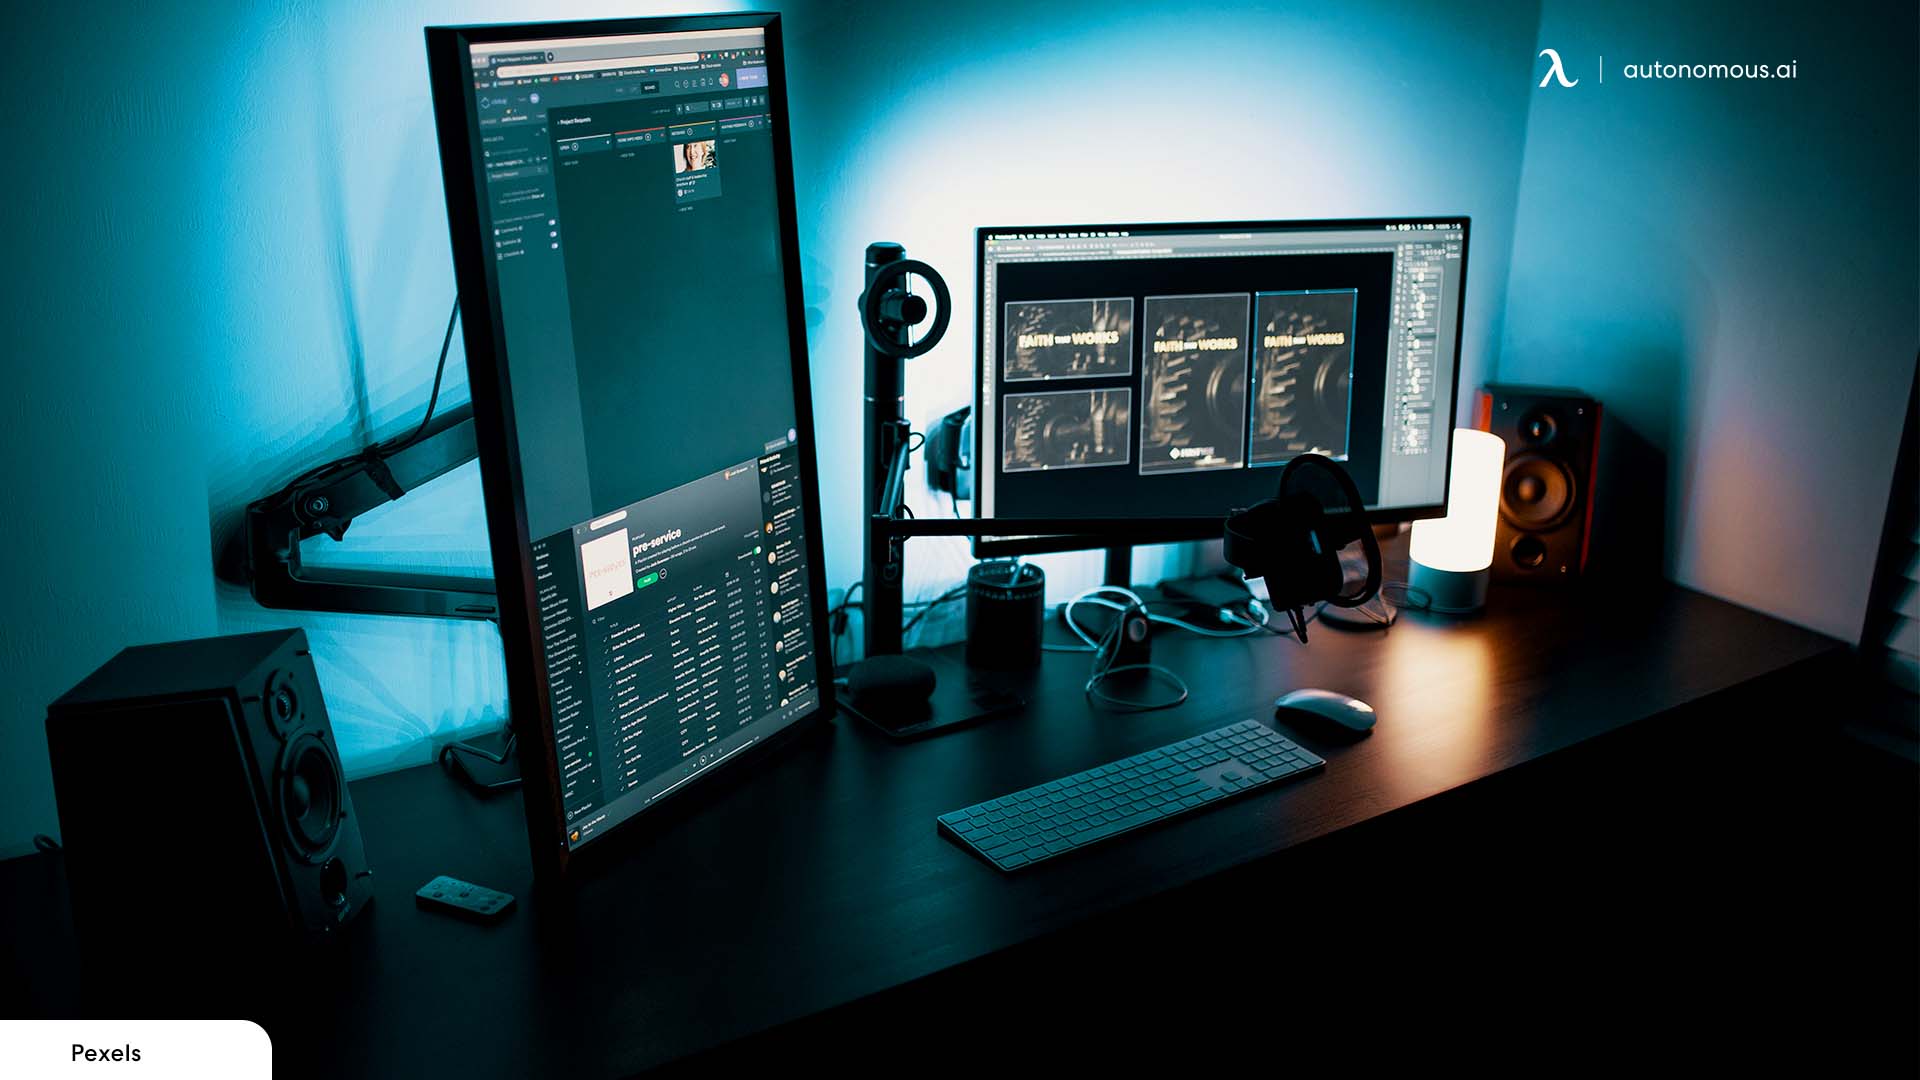 What Are Some Limitations of a Vertical Monitor Setup?